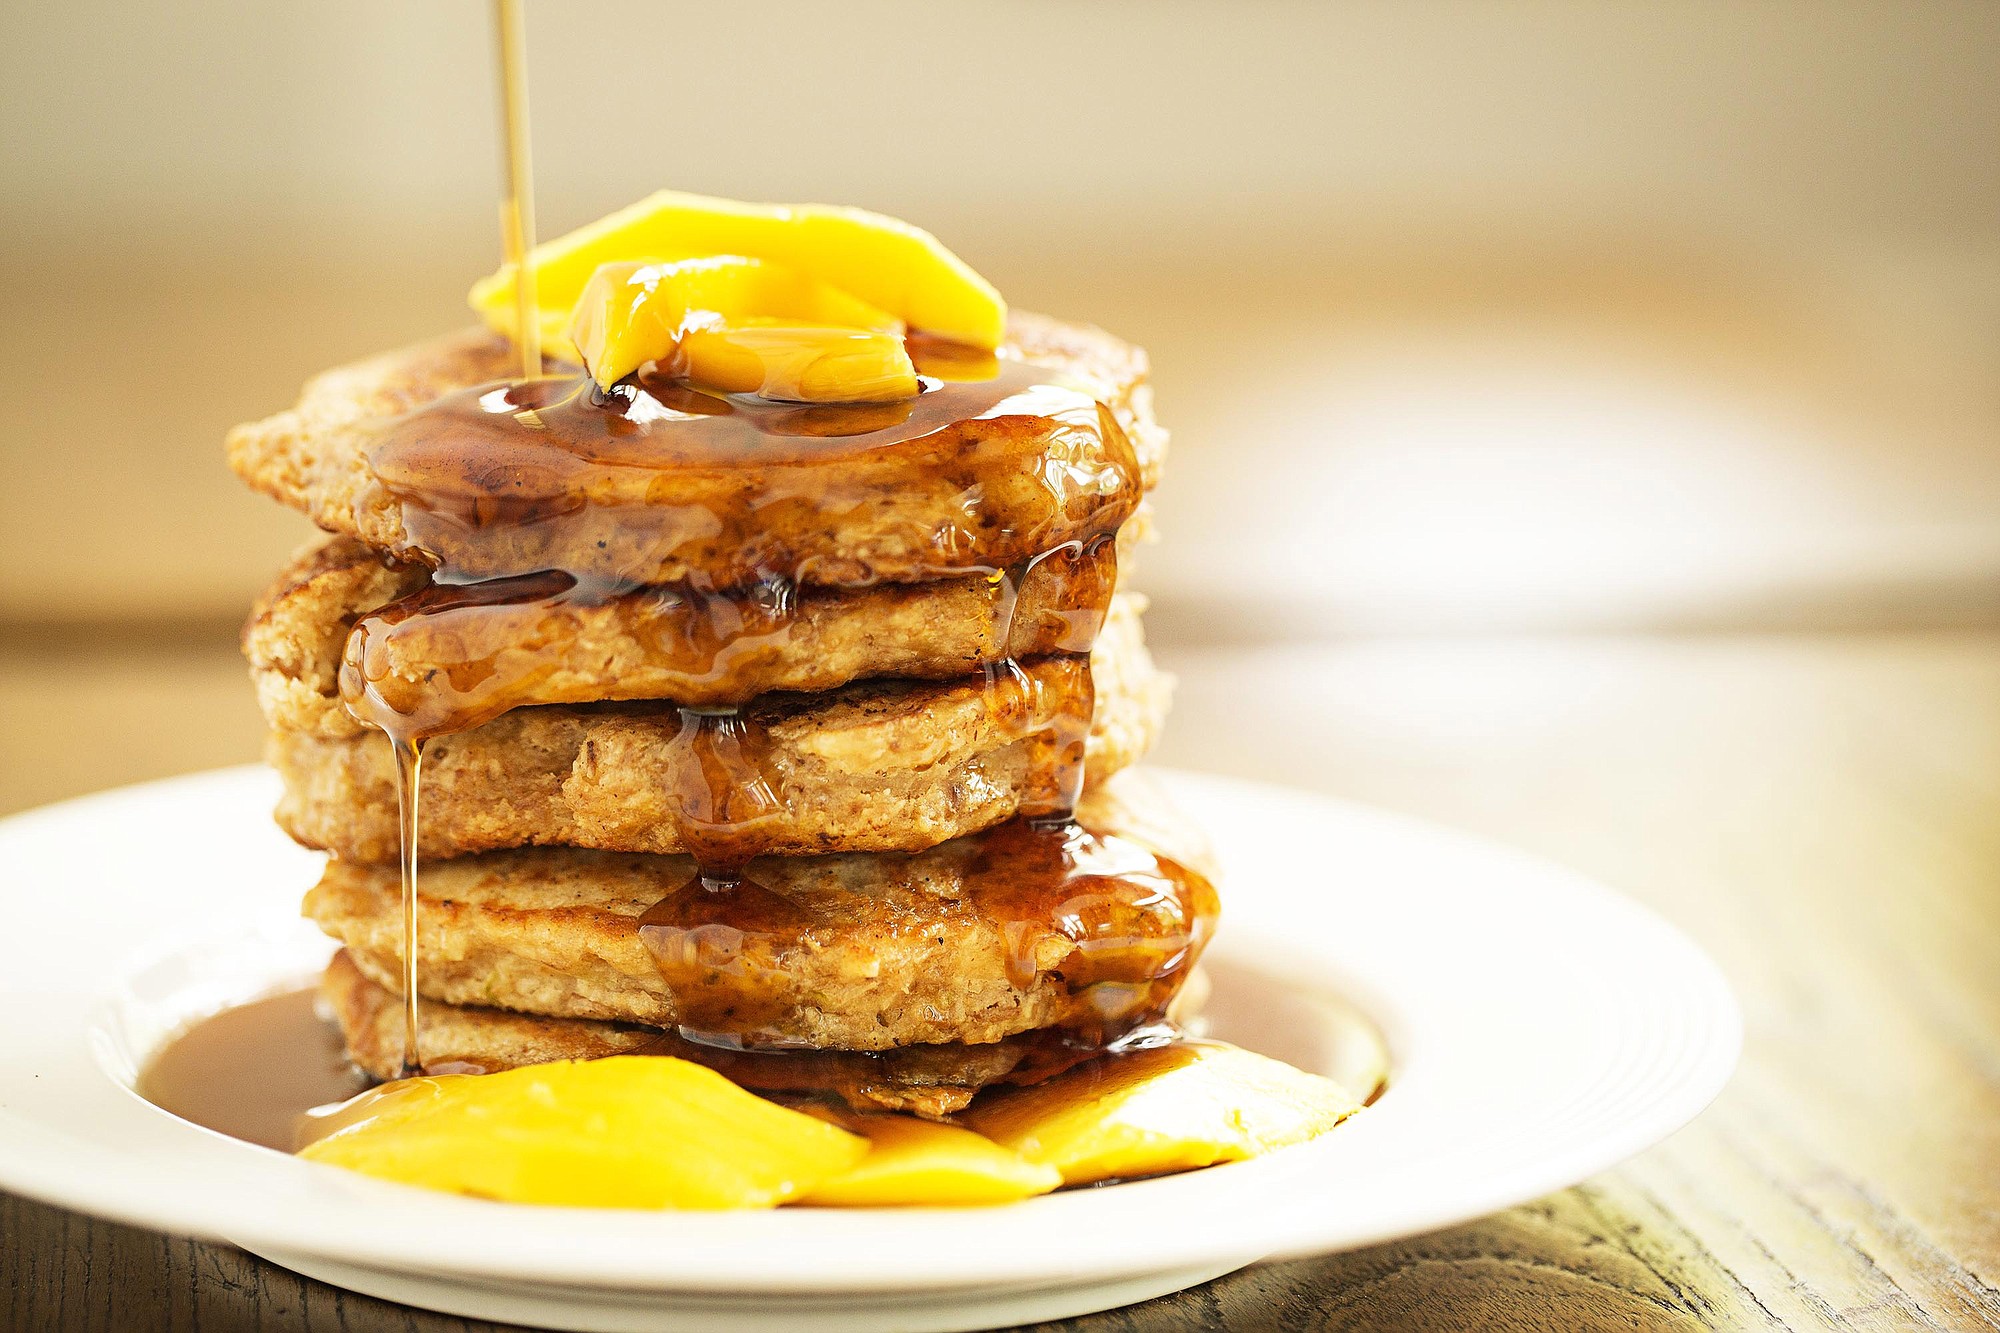 Scott Suchman/The Washington Post
A breakfast-for-dinner recipe: Coconut Lime Pancakes.